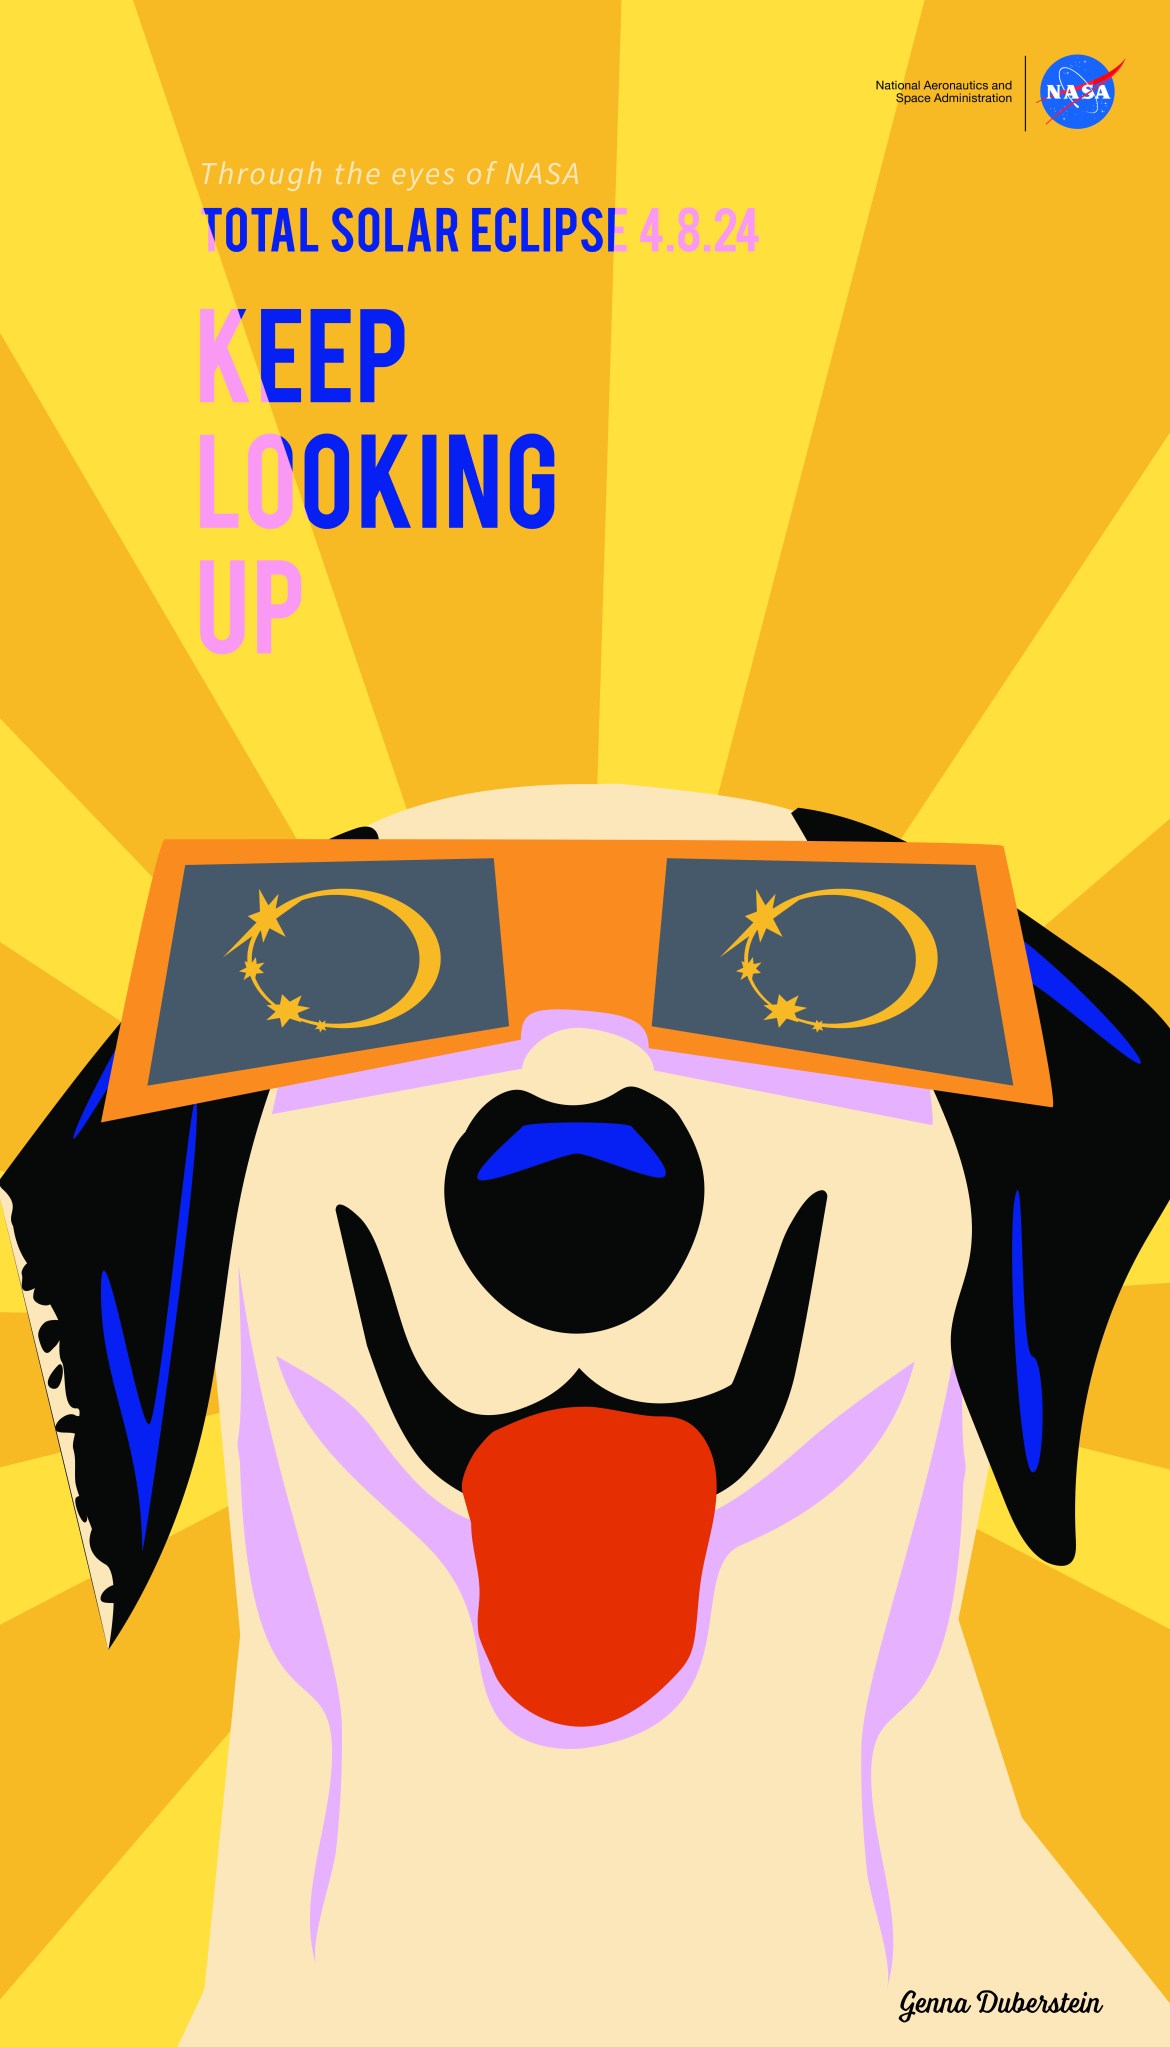 Against a background filled with orange and yellow rays, a cartoon dog looks upward. The dog is white with black ears. It is wearing orange eclipse glasses. The eclipse is reflected in the glasses. at the top, it says 